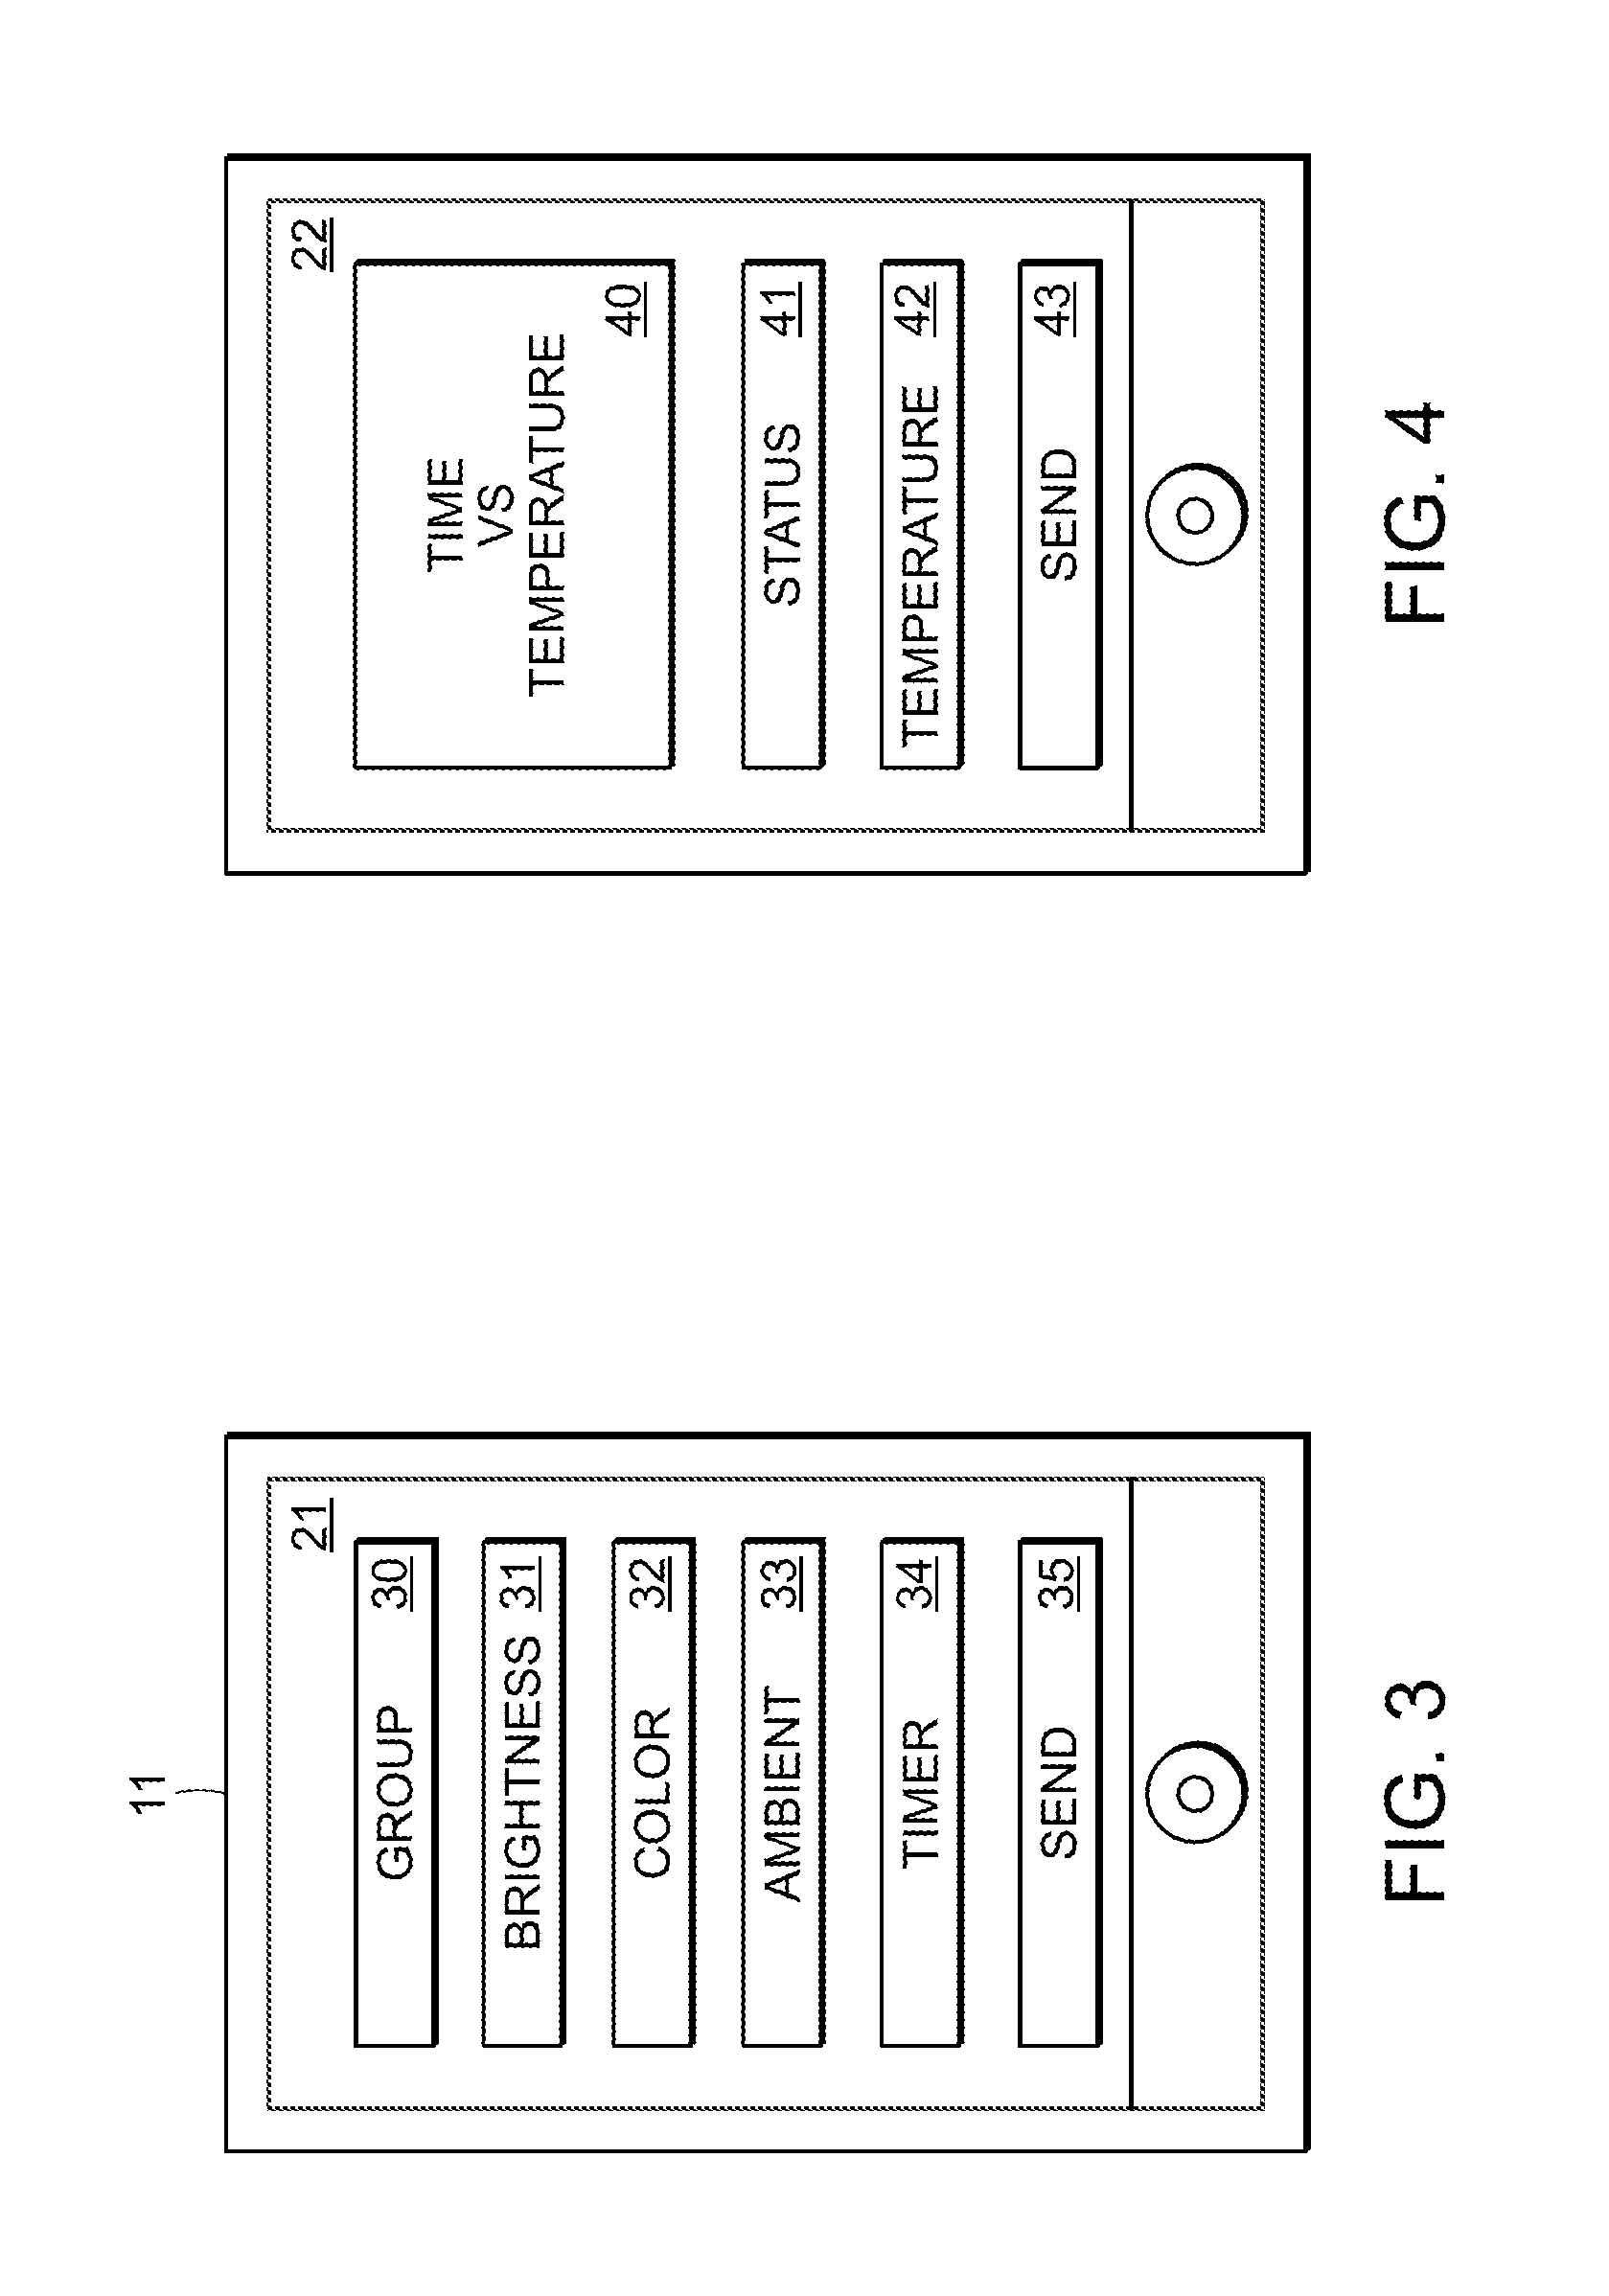 System and Method of Extending the Communication Range in a Visible Light Communication System